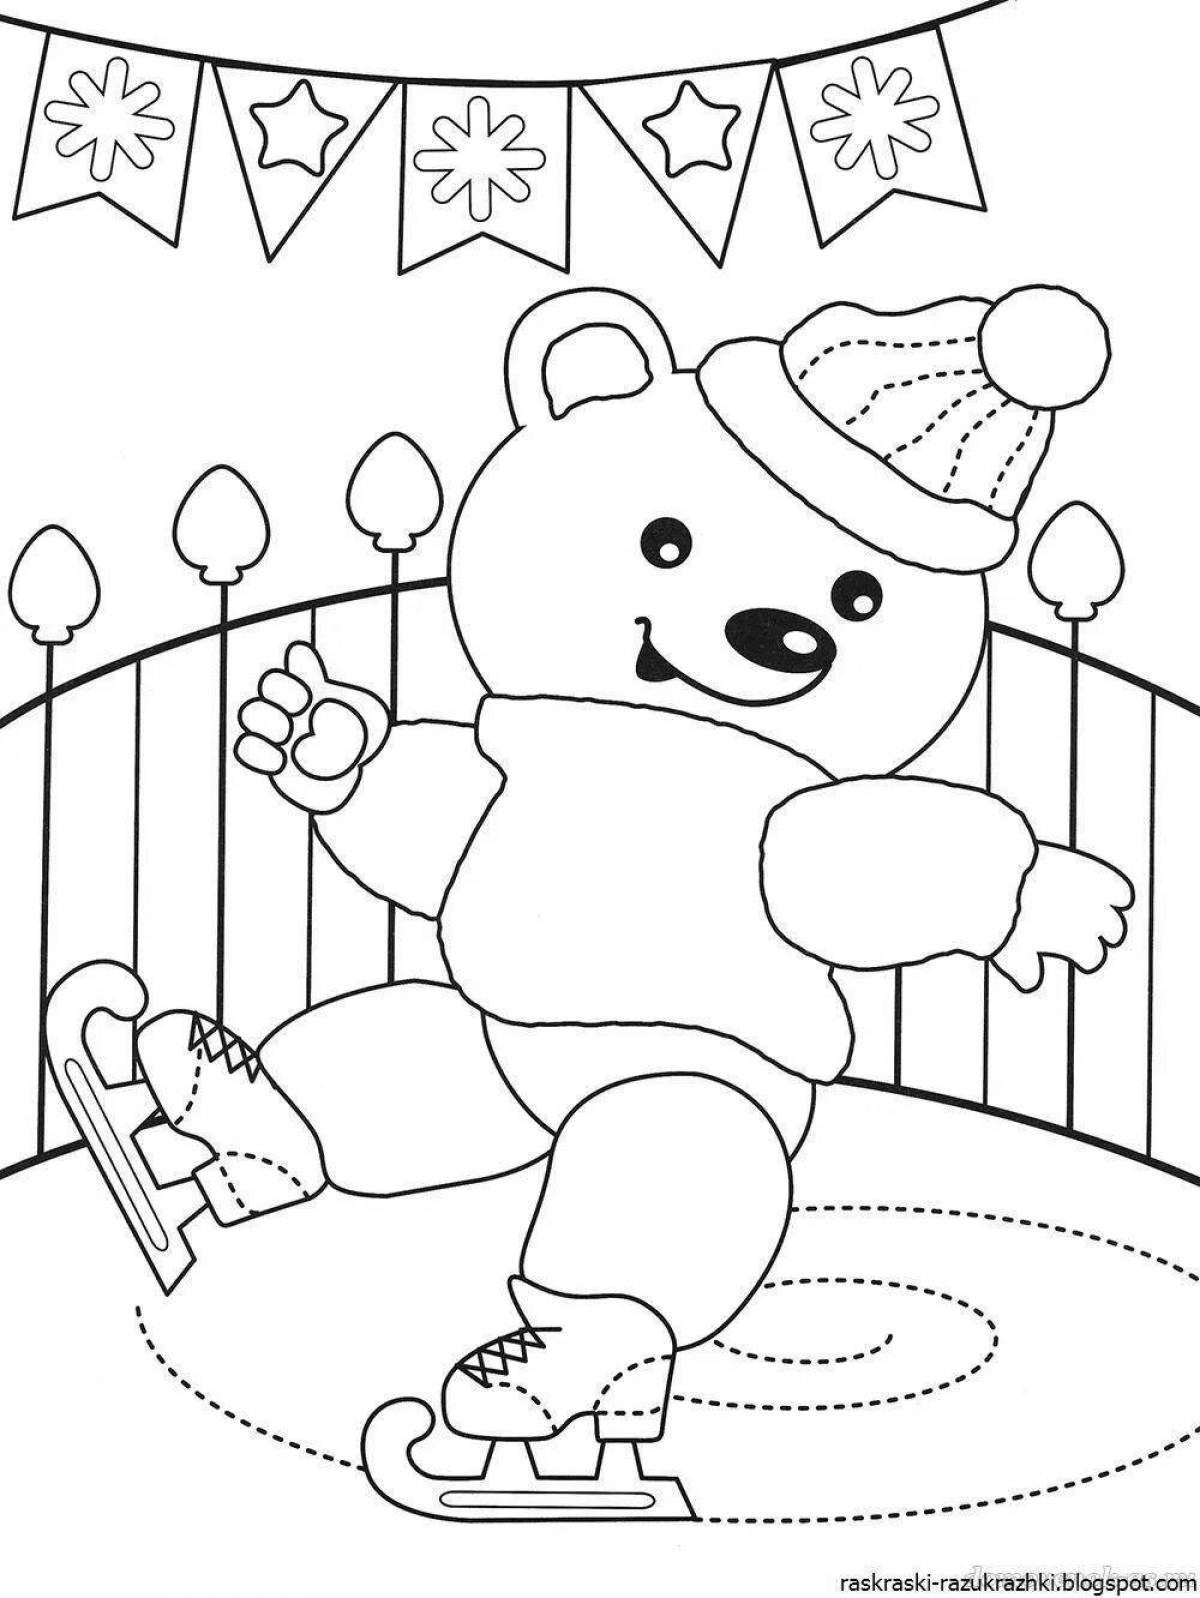 Merry winter coloring for children 6-7 years old